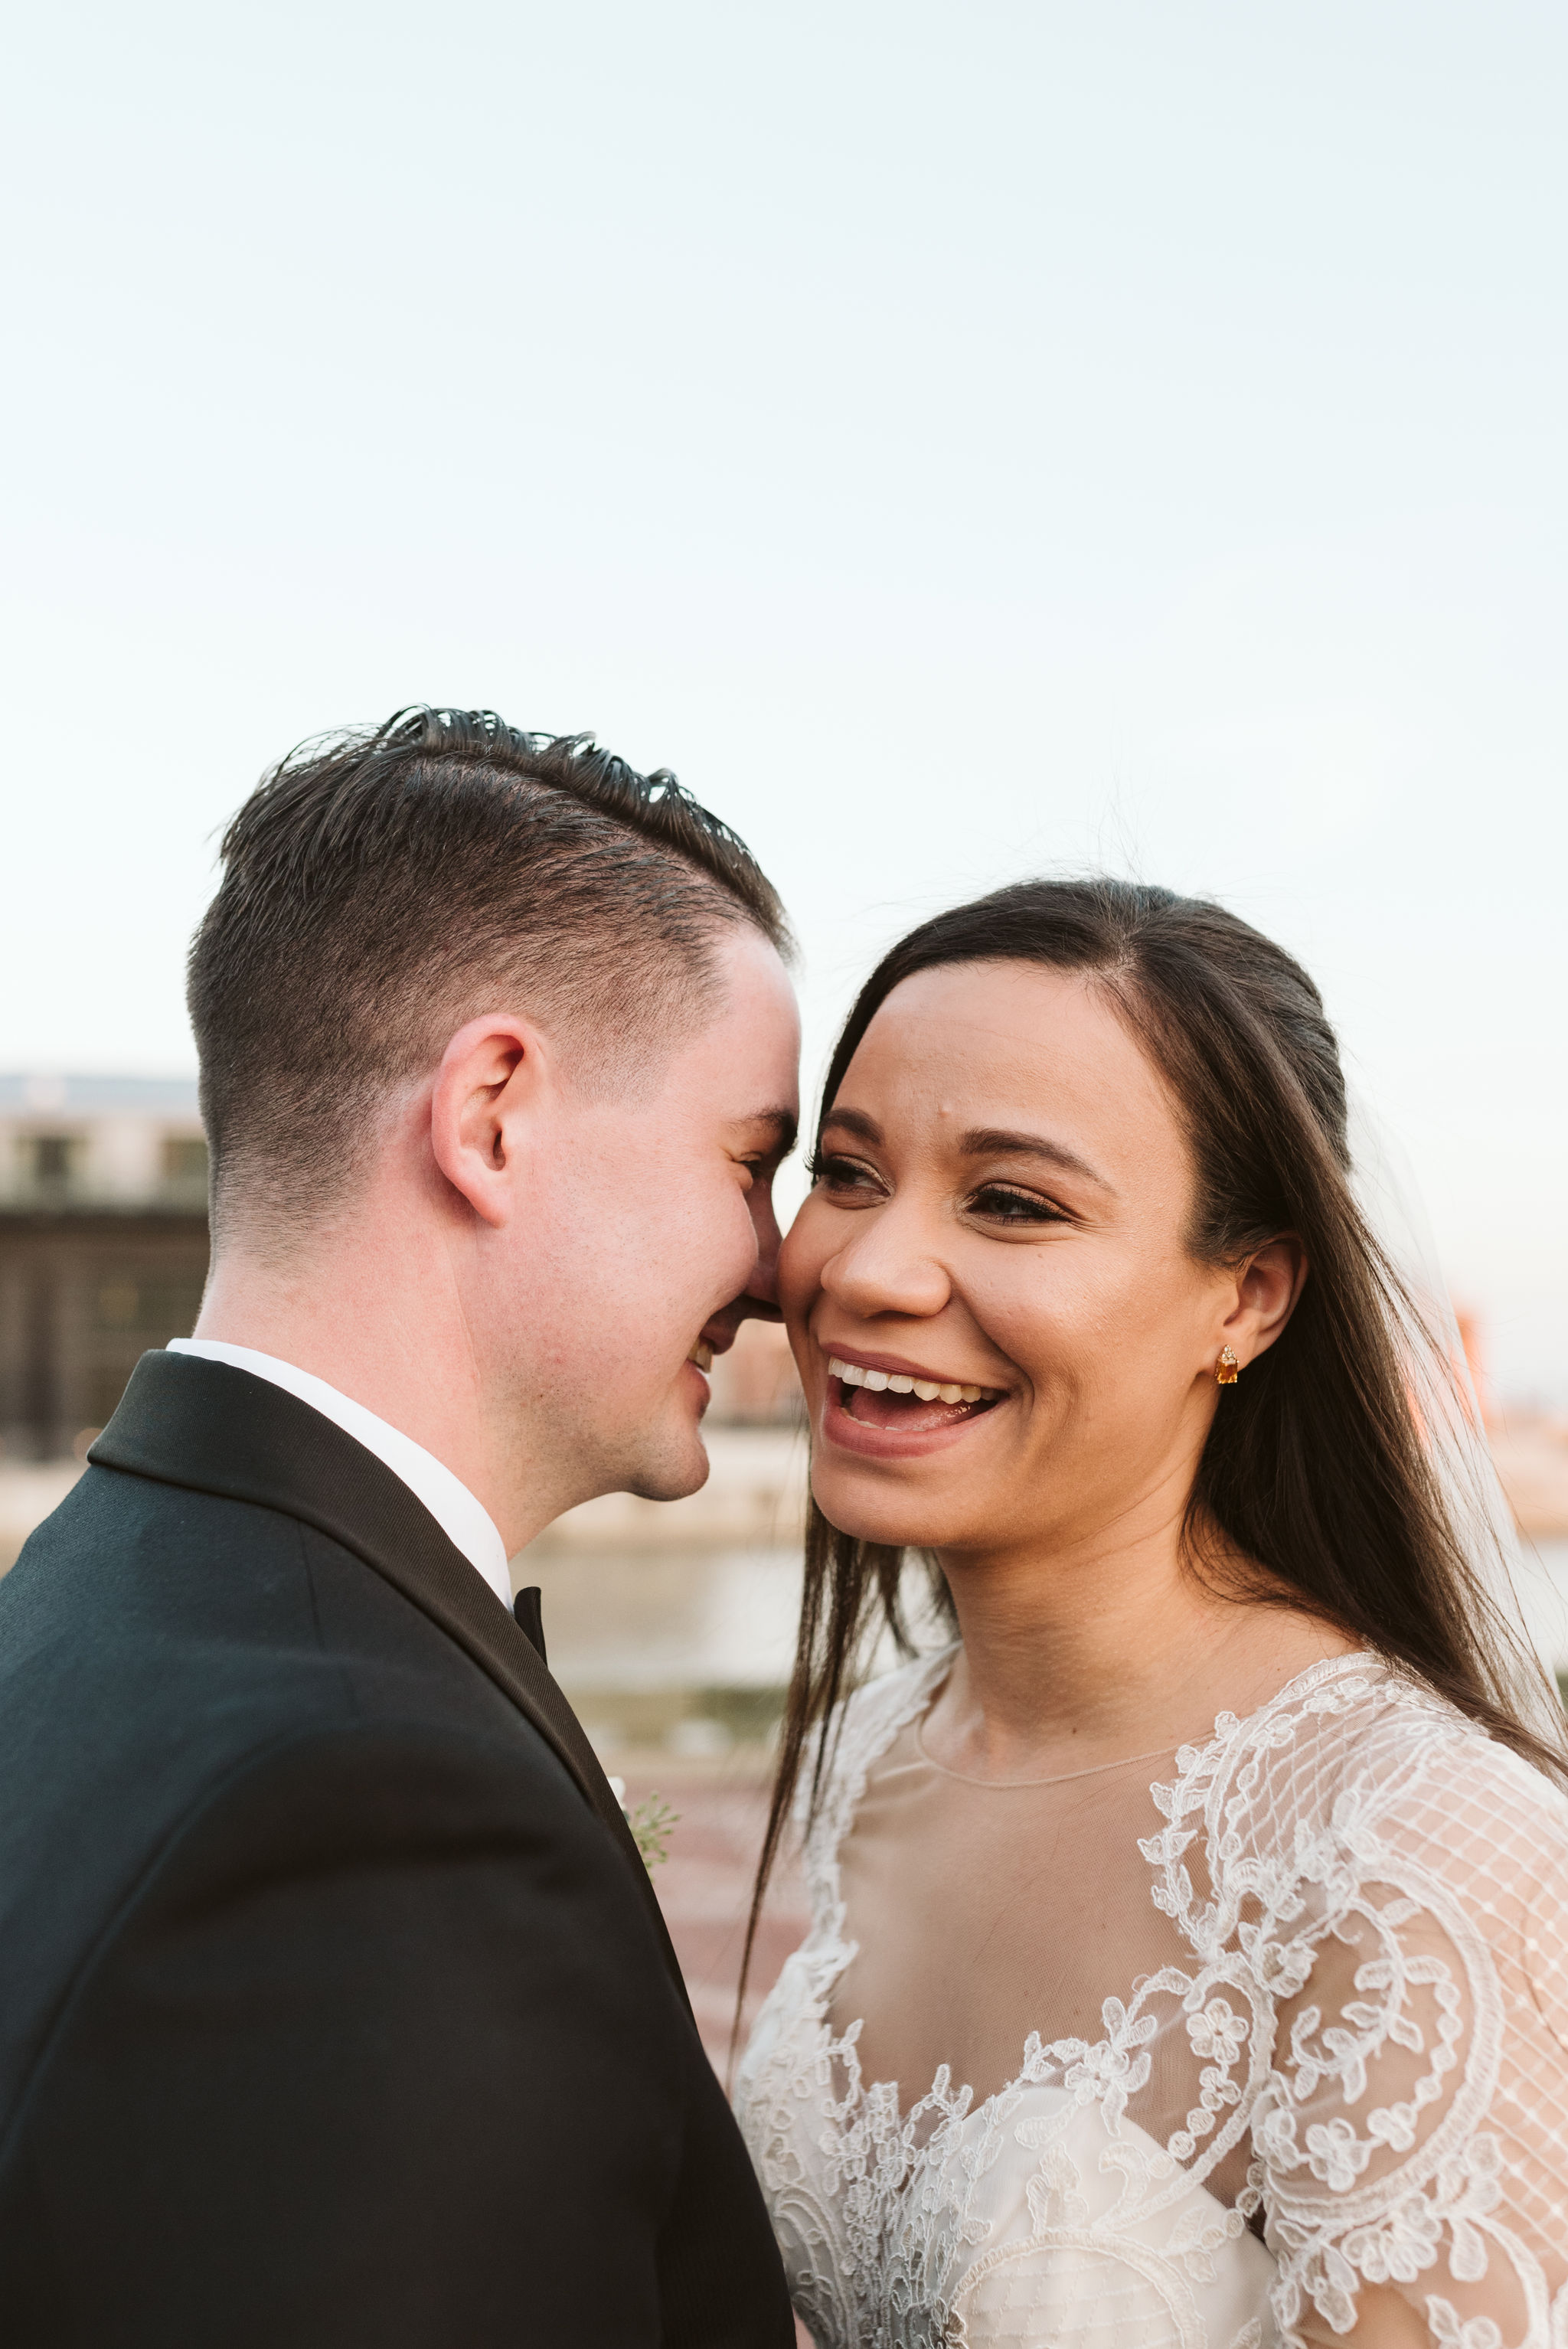  Baltimore, Fells Point, Maryland Wedding Photographer, Winter Wedding, Historic, Classic, Vintage, Closeup of Bride and Groom Together, Beauty by Jacs 